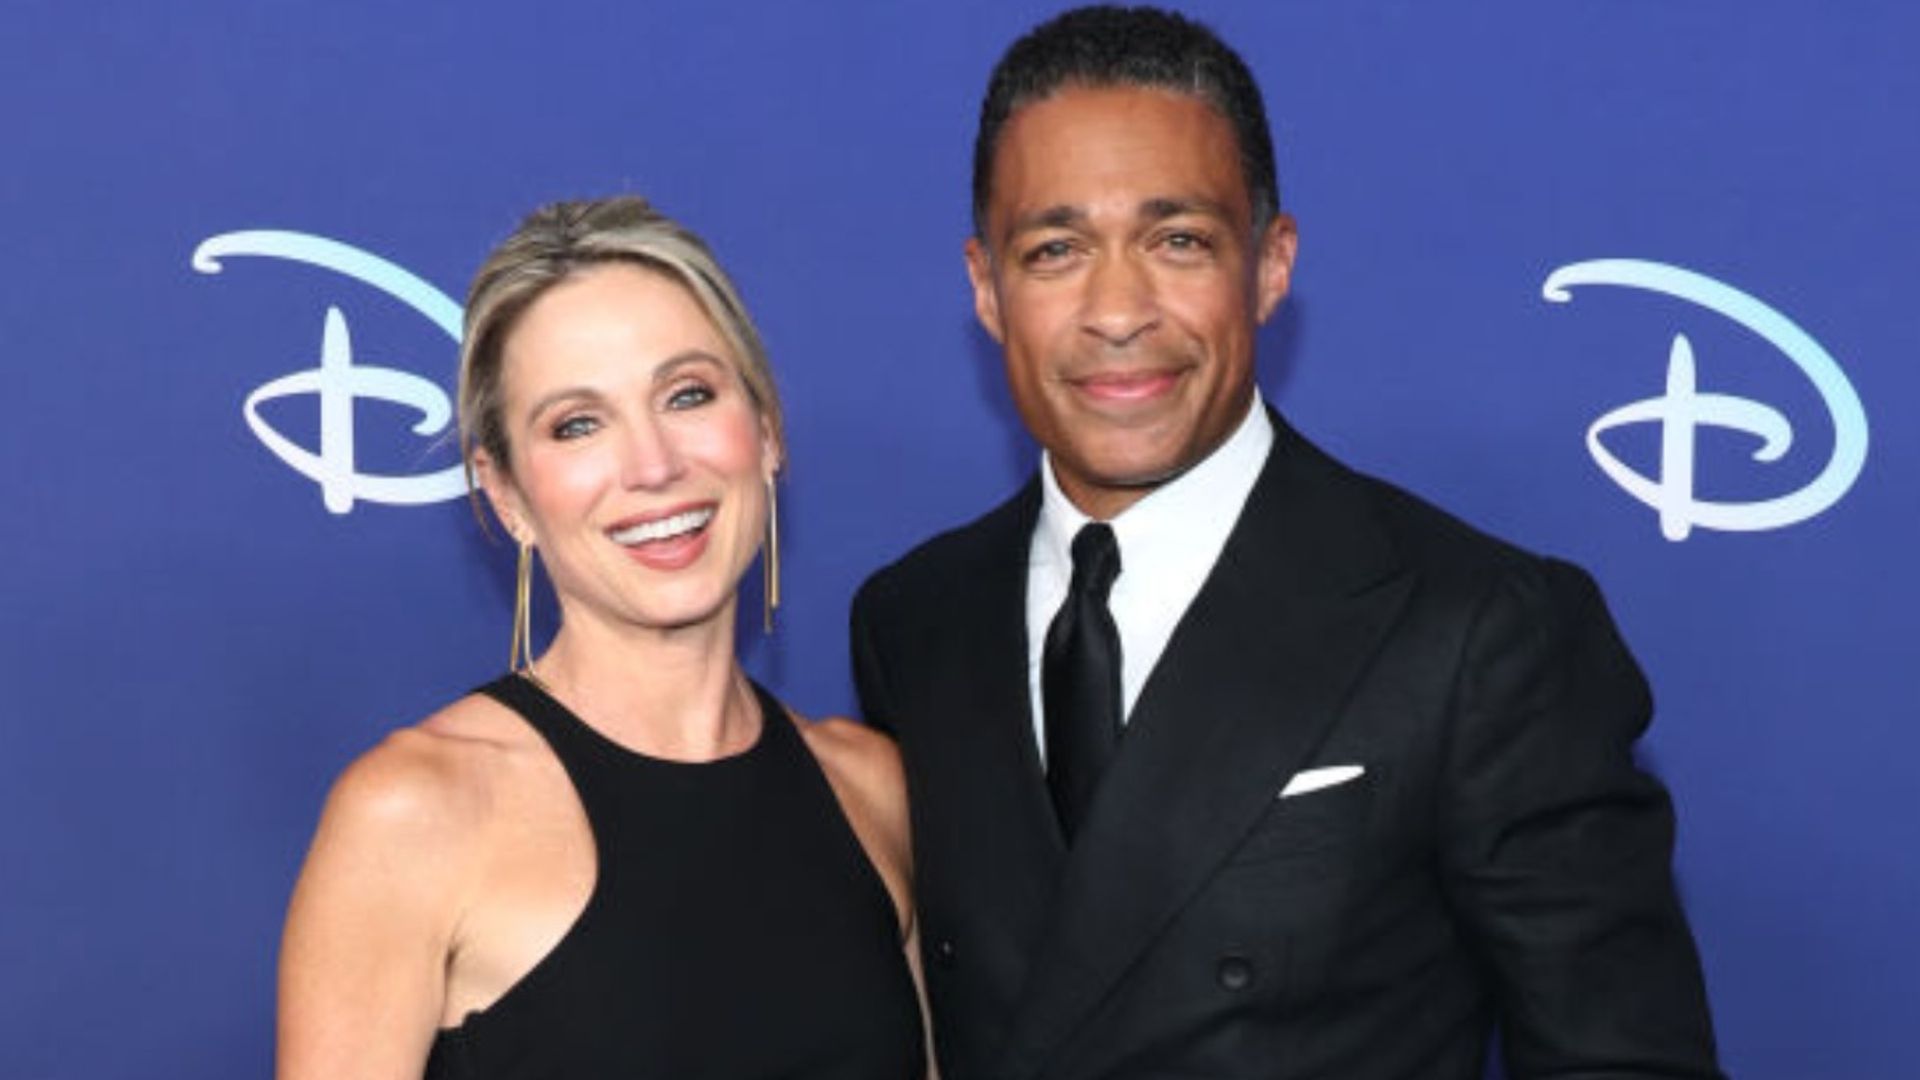 Amy Robach and T.J. Holmes smiles at Disney event before their relationship was made public 